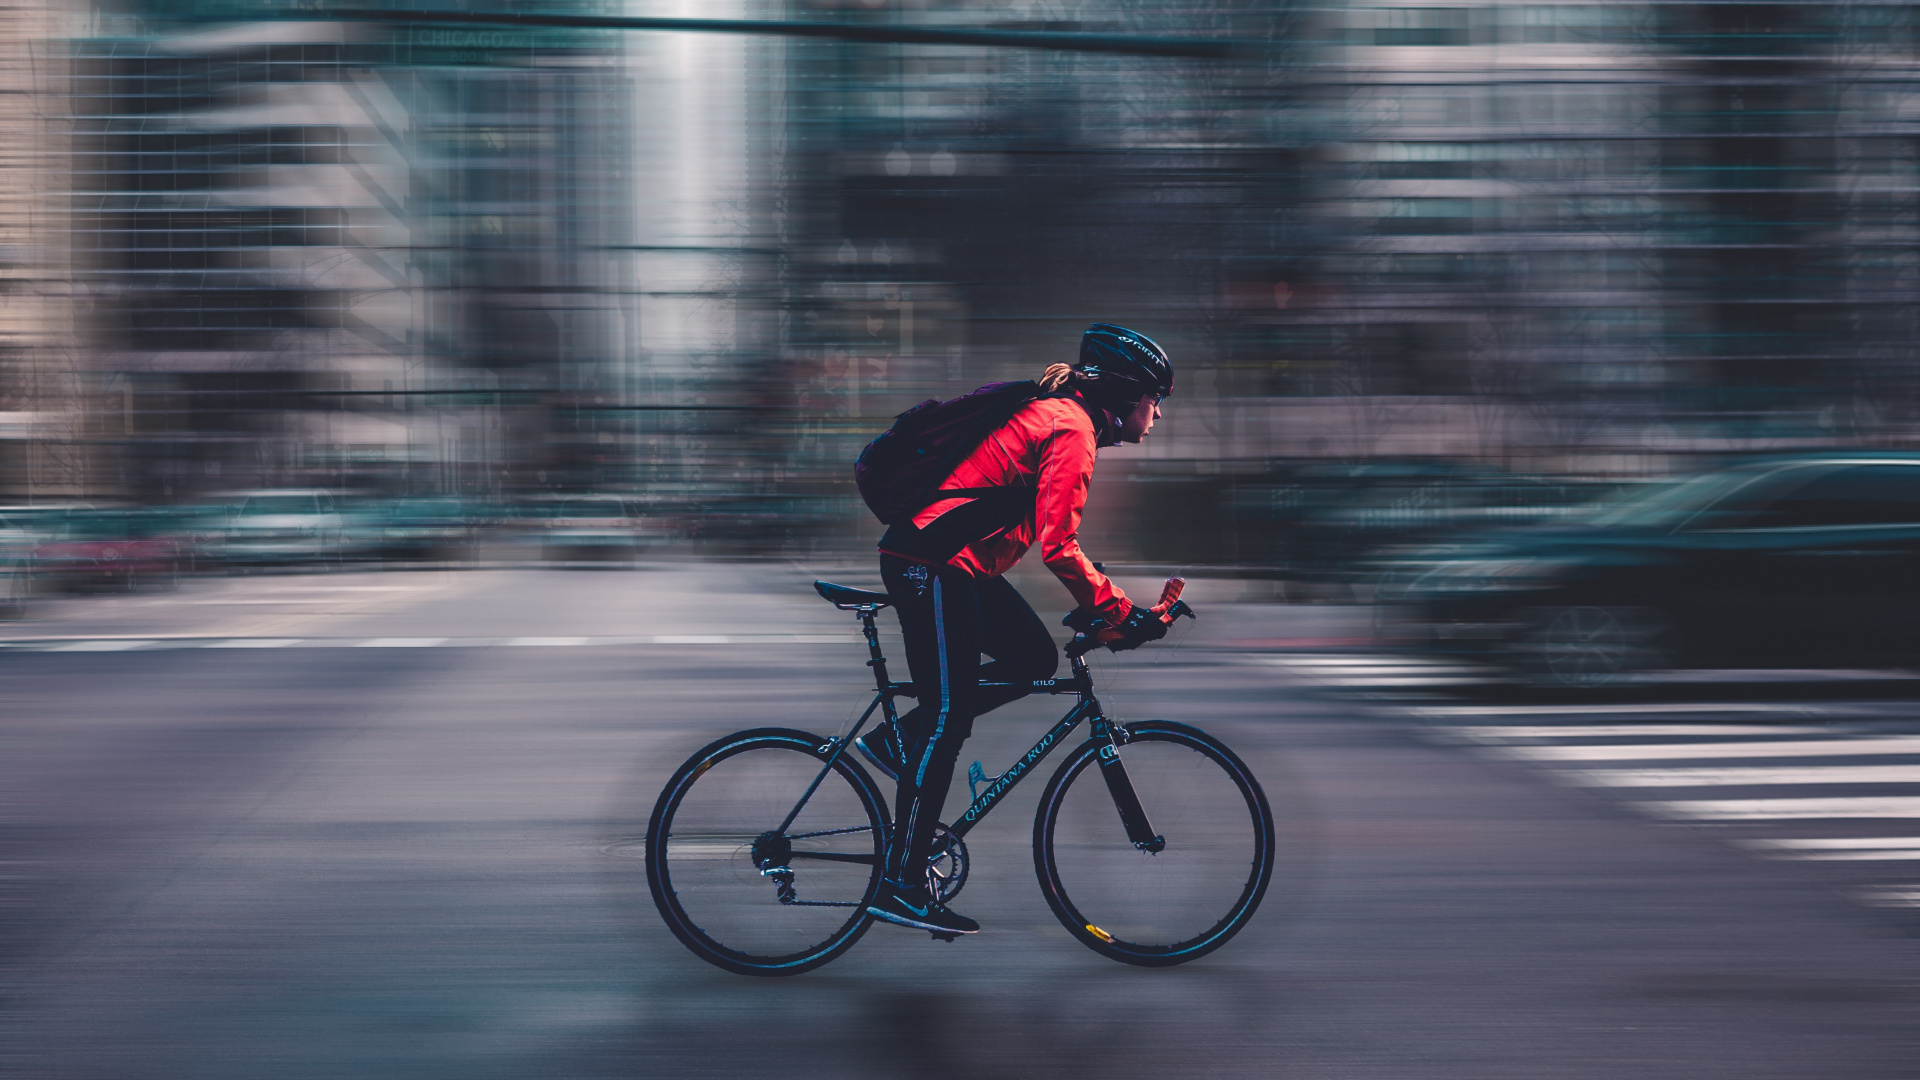 Man in Red Jacket Riding Bicycle Sur Route Pendant la Journée. Wallpaper in 1920x1080 Resolution